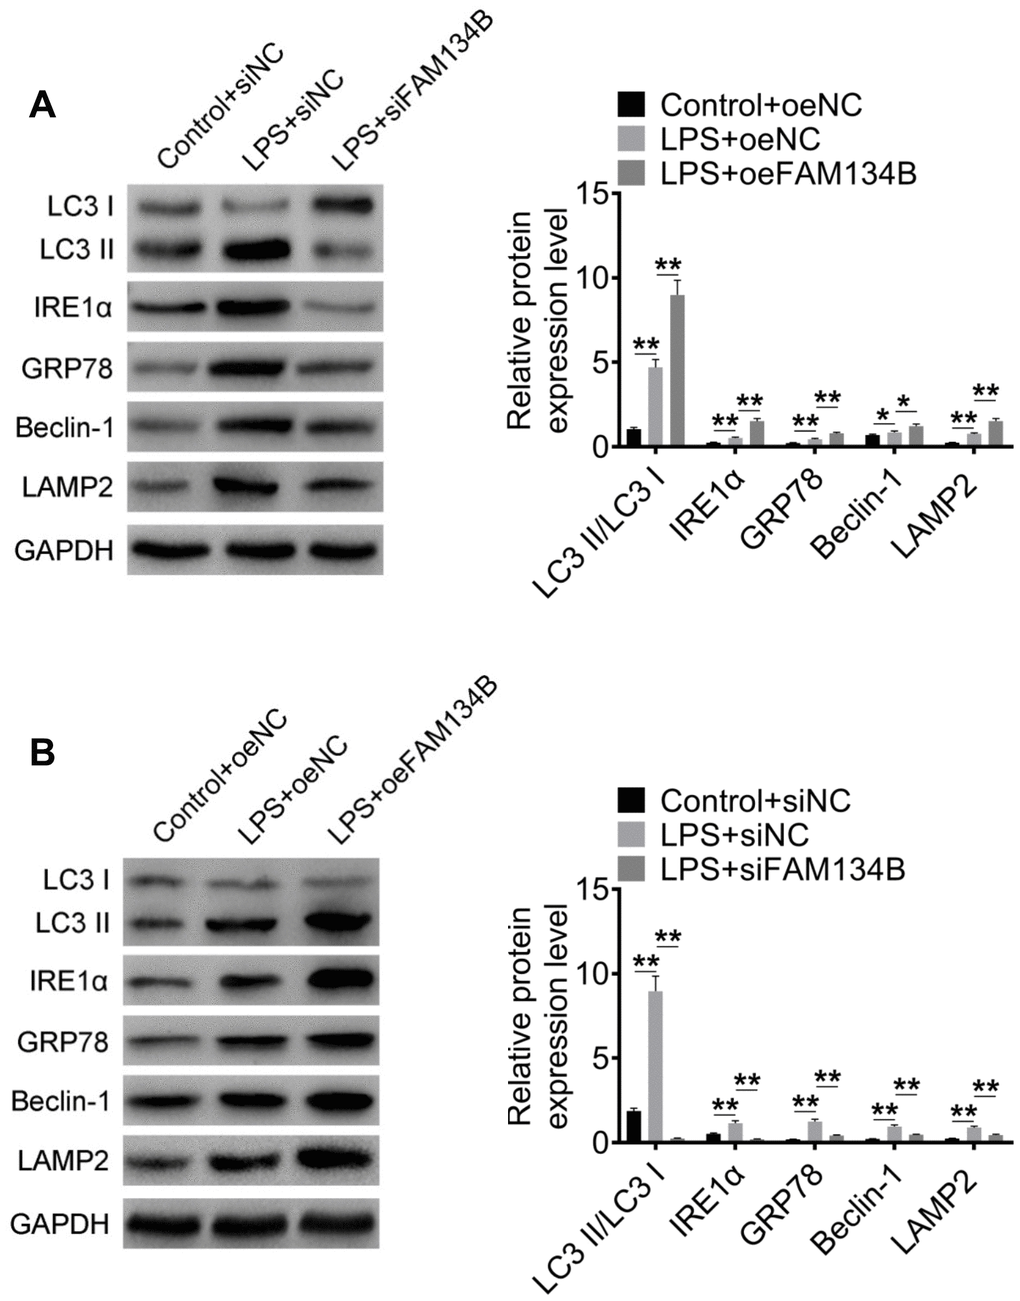 The effect of FAM134B on the expressions of autophagy-related proteins. (A, B) Cardiomyocytes were transfected with oeNC, oeFAM143B, siNC, siFAM134B, and then treated with LPS. The protein expressions of LC3-II/I, IRE1α, GRP78, Beclin-1, and LAMP2 were detected by western blot analysis. Data are shown as mean ± SD. *P